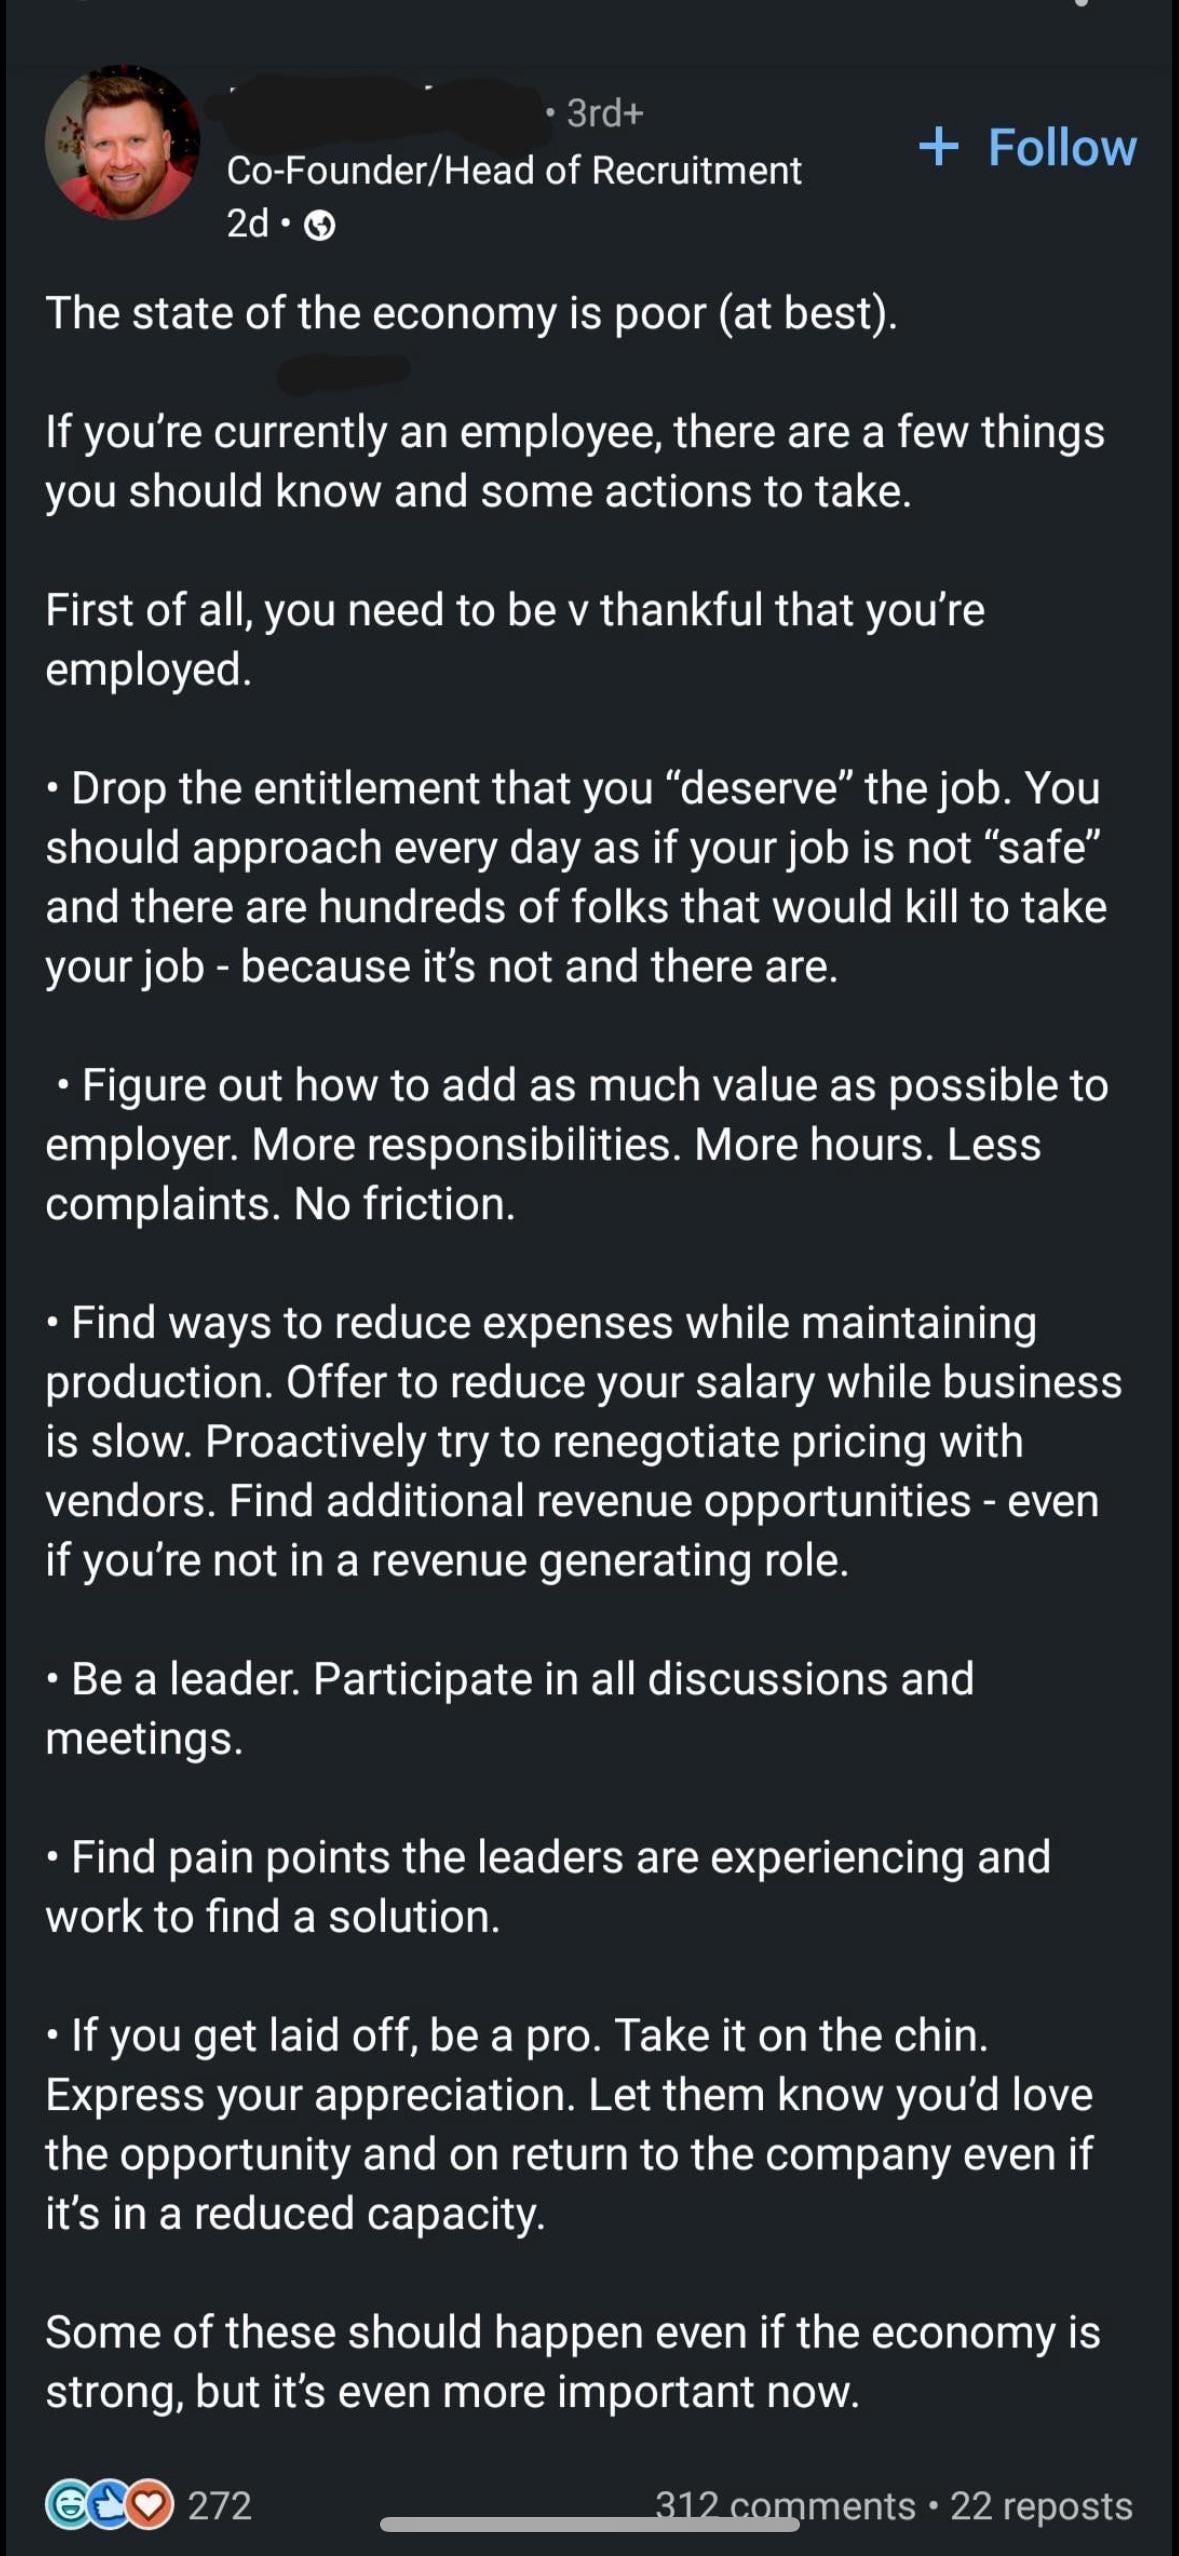 r/LinkedInLunatics - Drop the entitlement and offer to reduce your salary <3